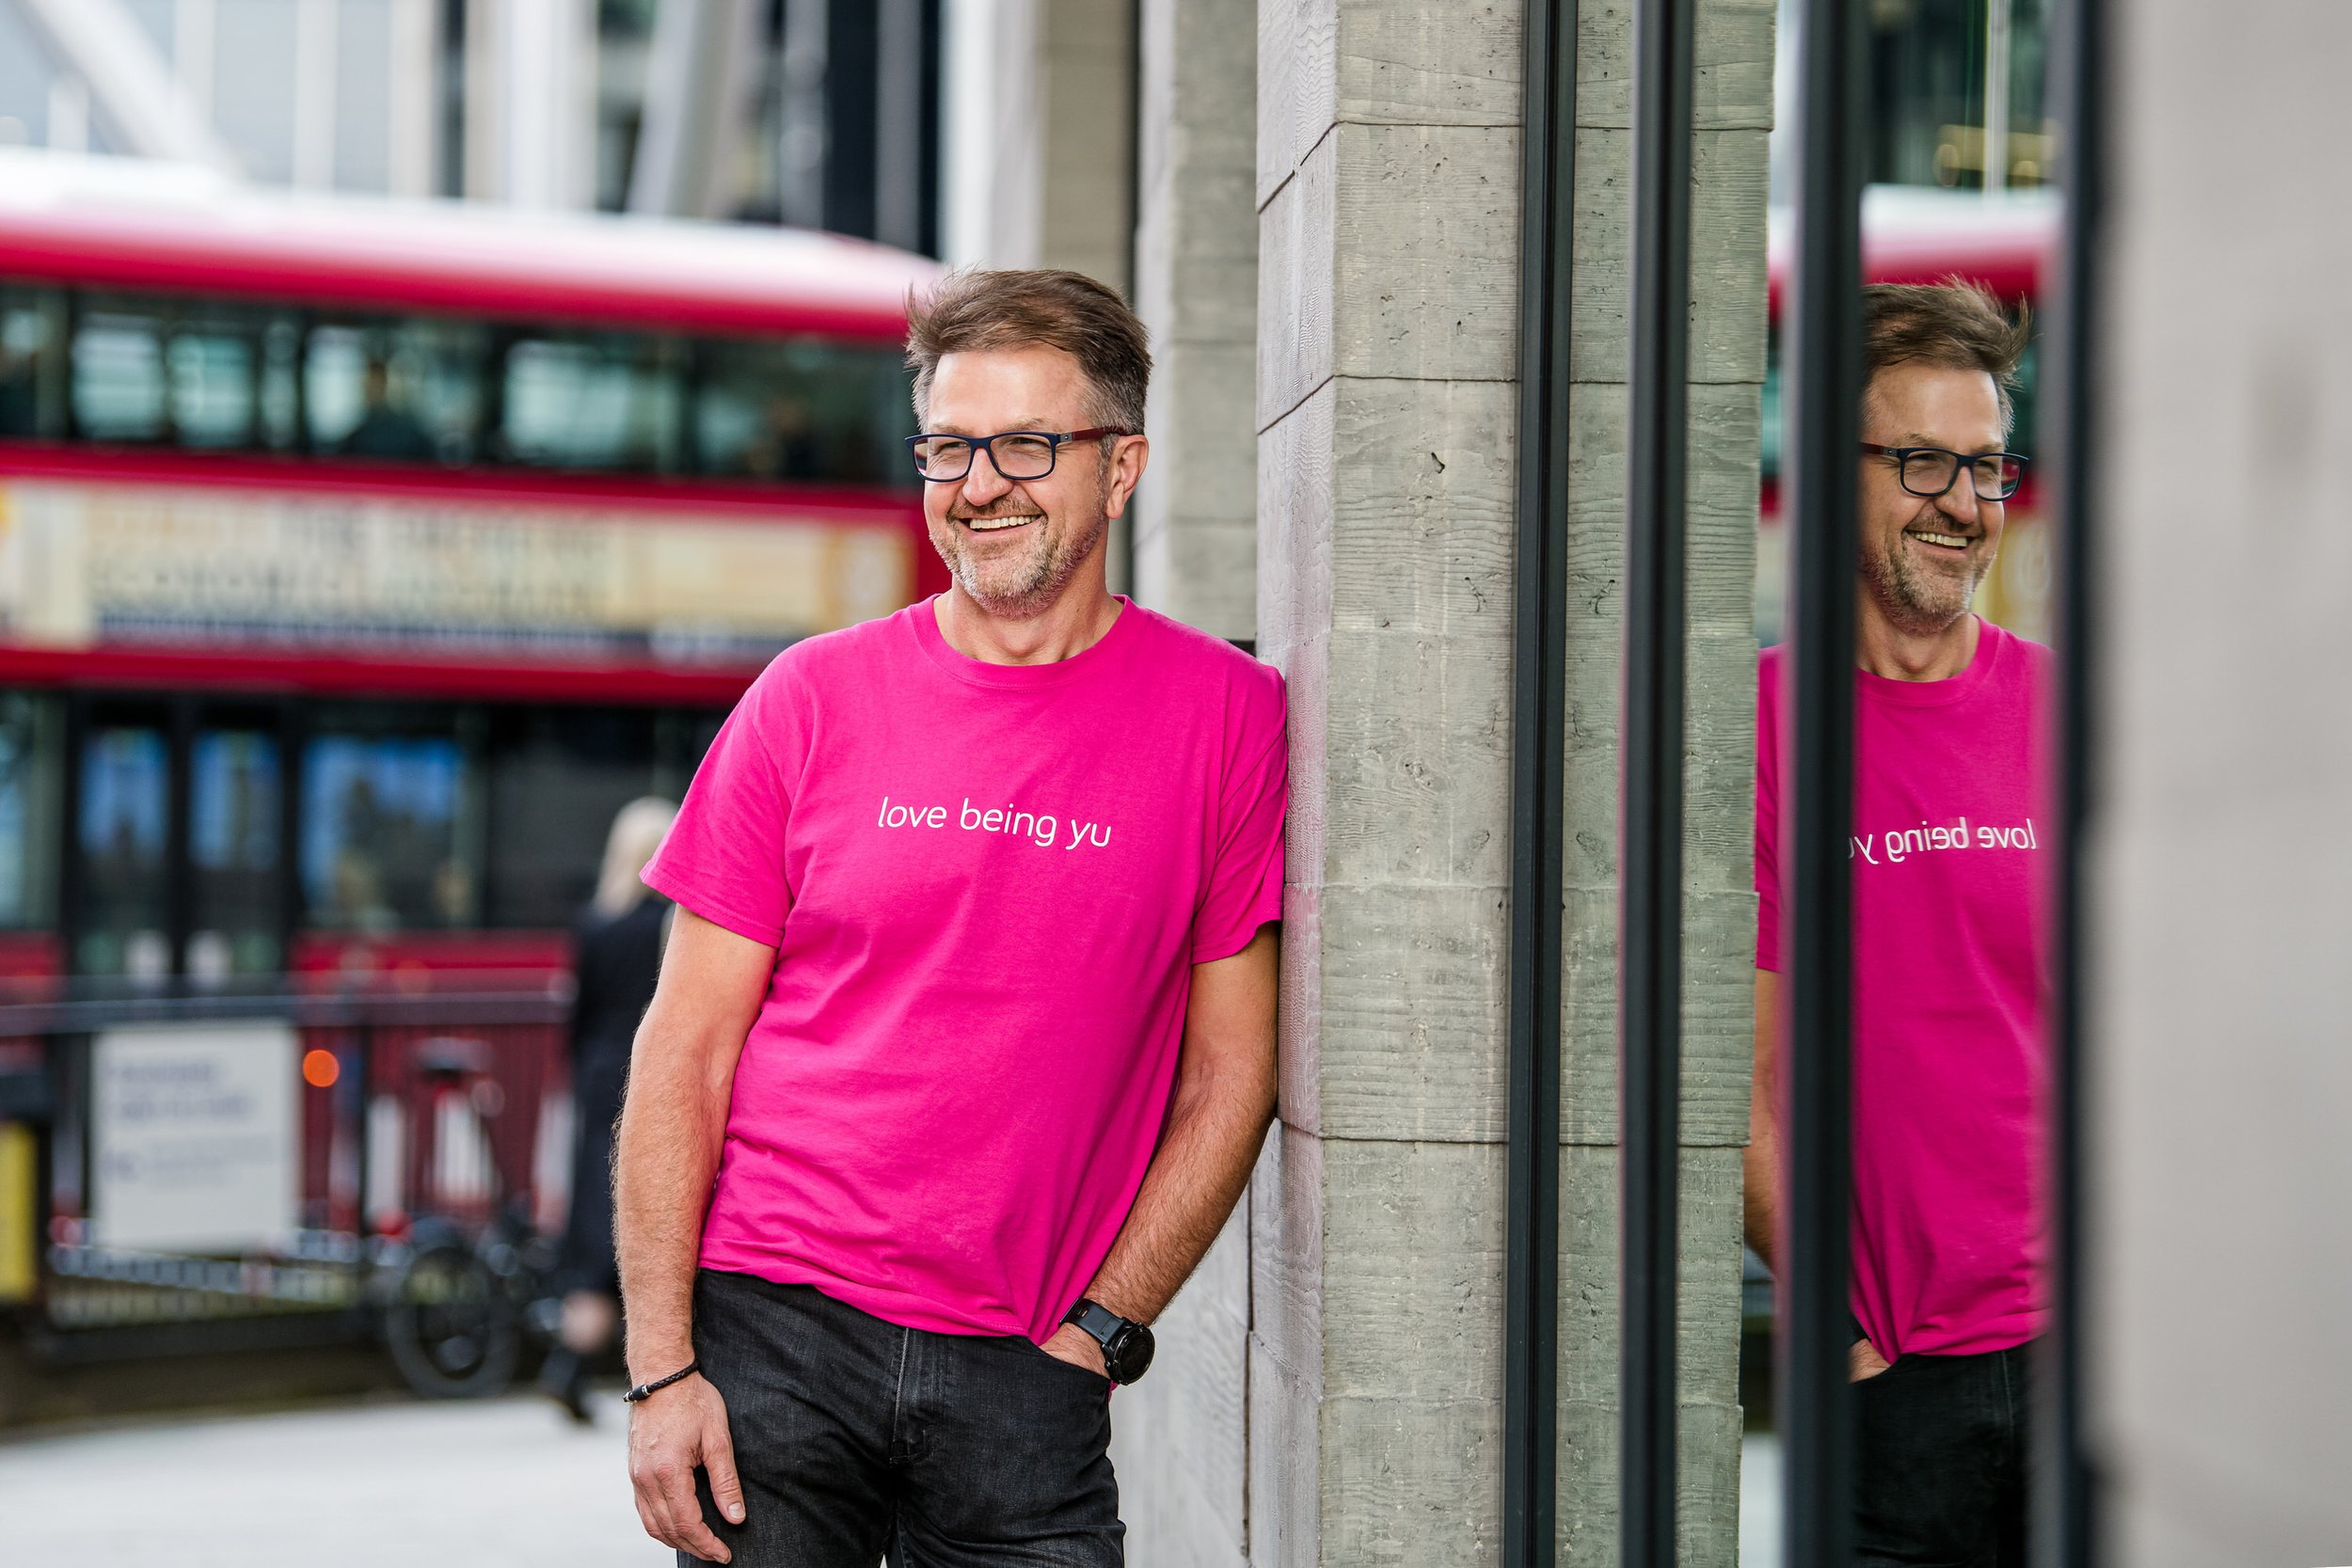  Business man in branded pink t-shirt poses outside on London street. 